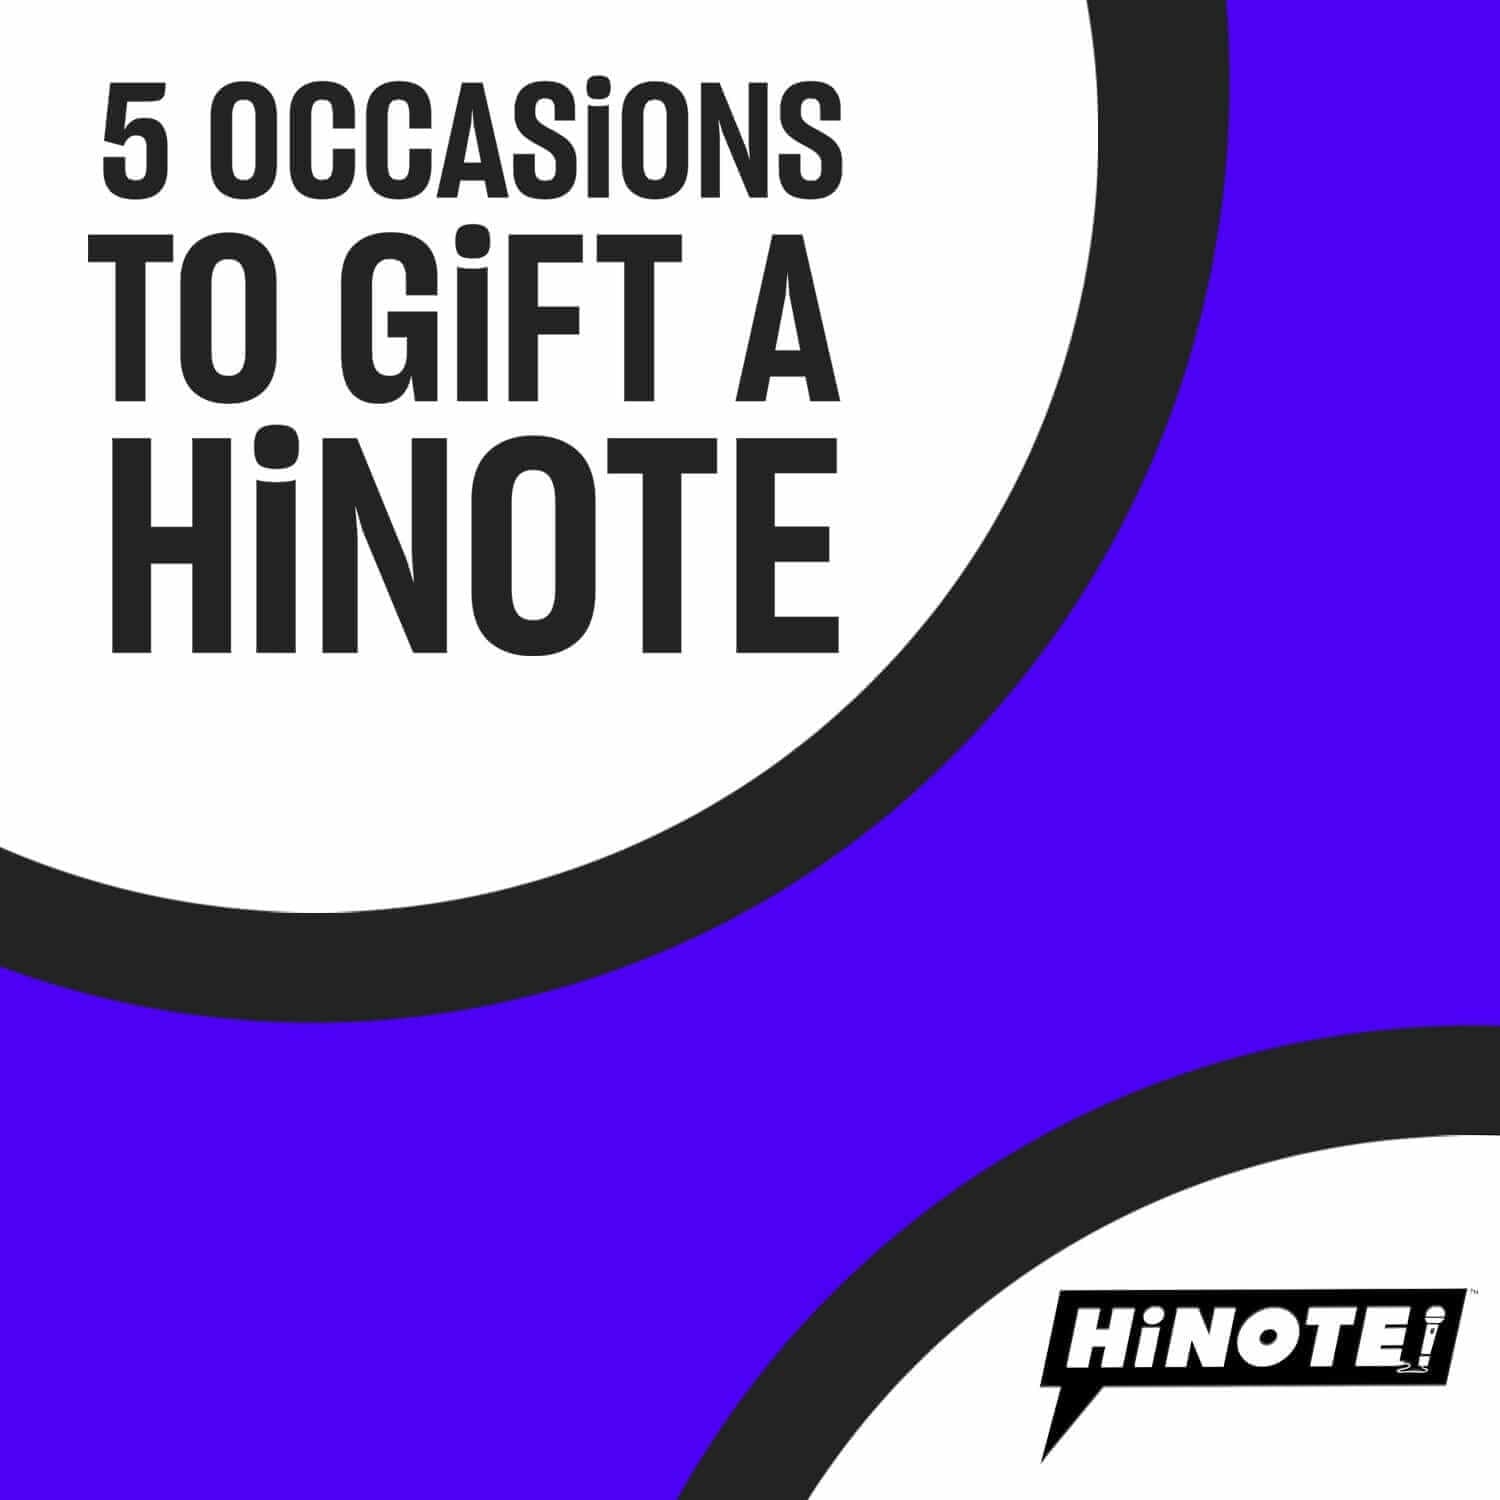 5 Occasions to Gift a HiNOTE